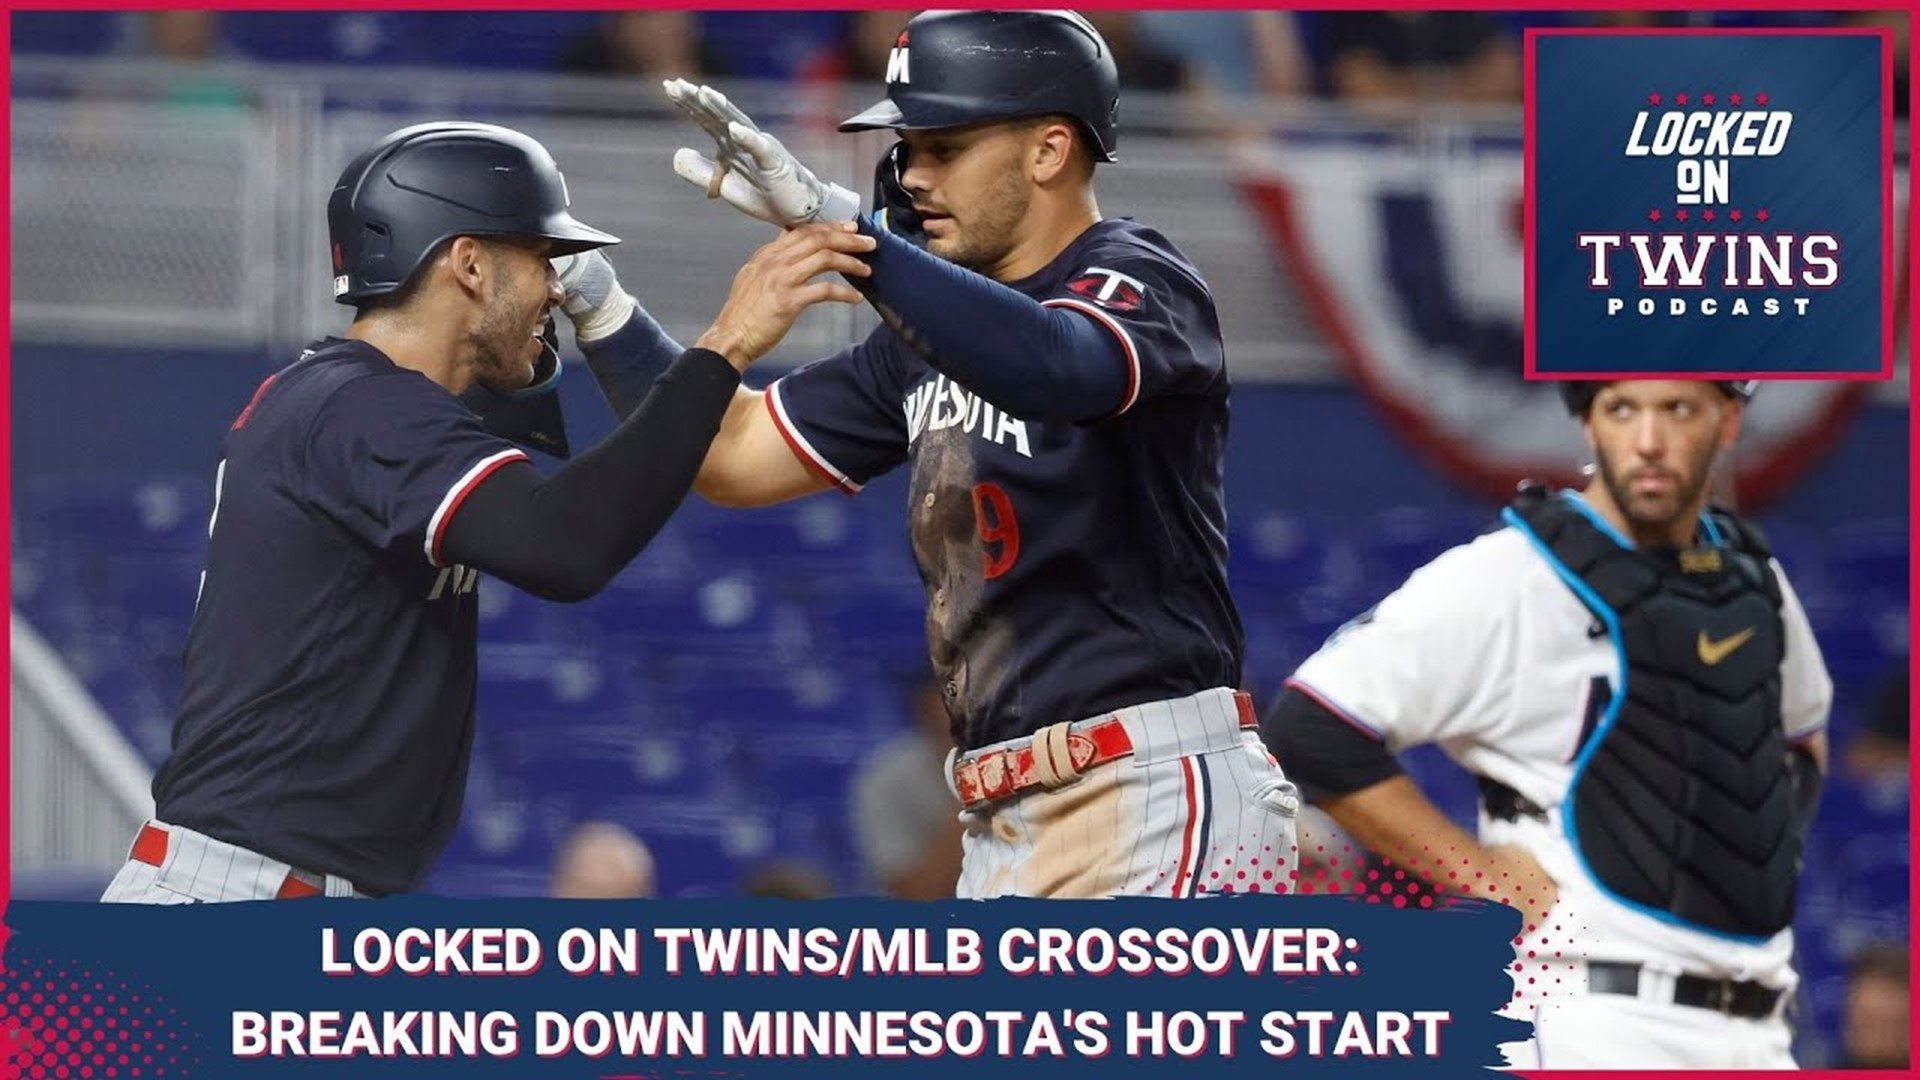 The Minnesota Twins are 4-0, but how? Brandon joins Sully on Locked on MLB to break down what's working for the Twins across the board, including Joey Gallo